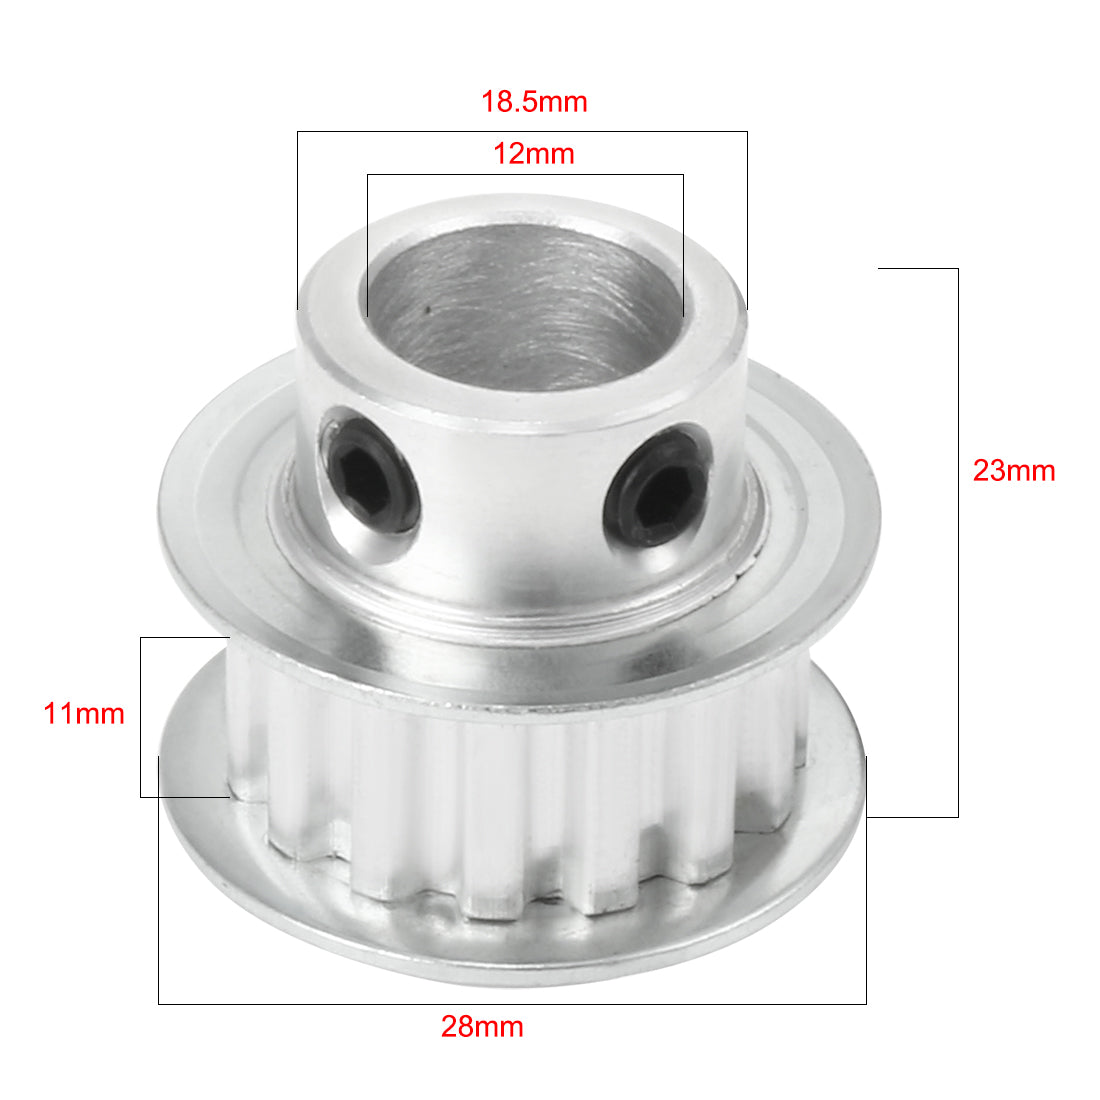 uxcell Uxcell Aluminum XL 15 Teeth 12mm Bore Timing Belt Idler Pulley Flange Synchronous Wheel for 10mm Belt 3D Printer CNC